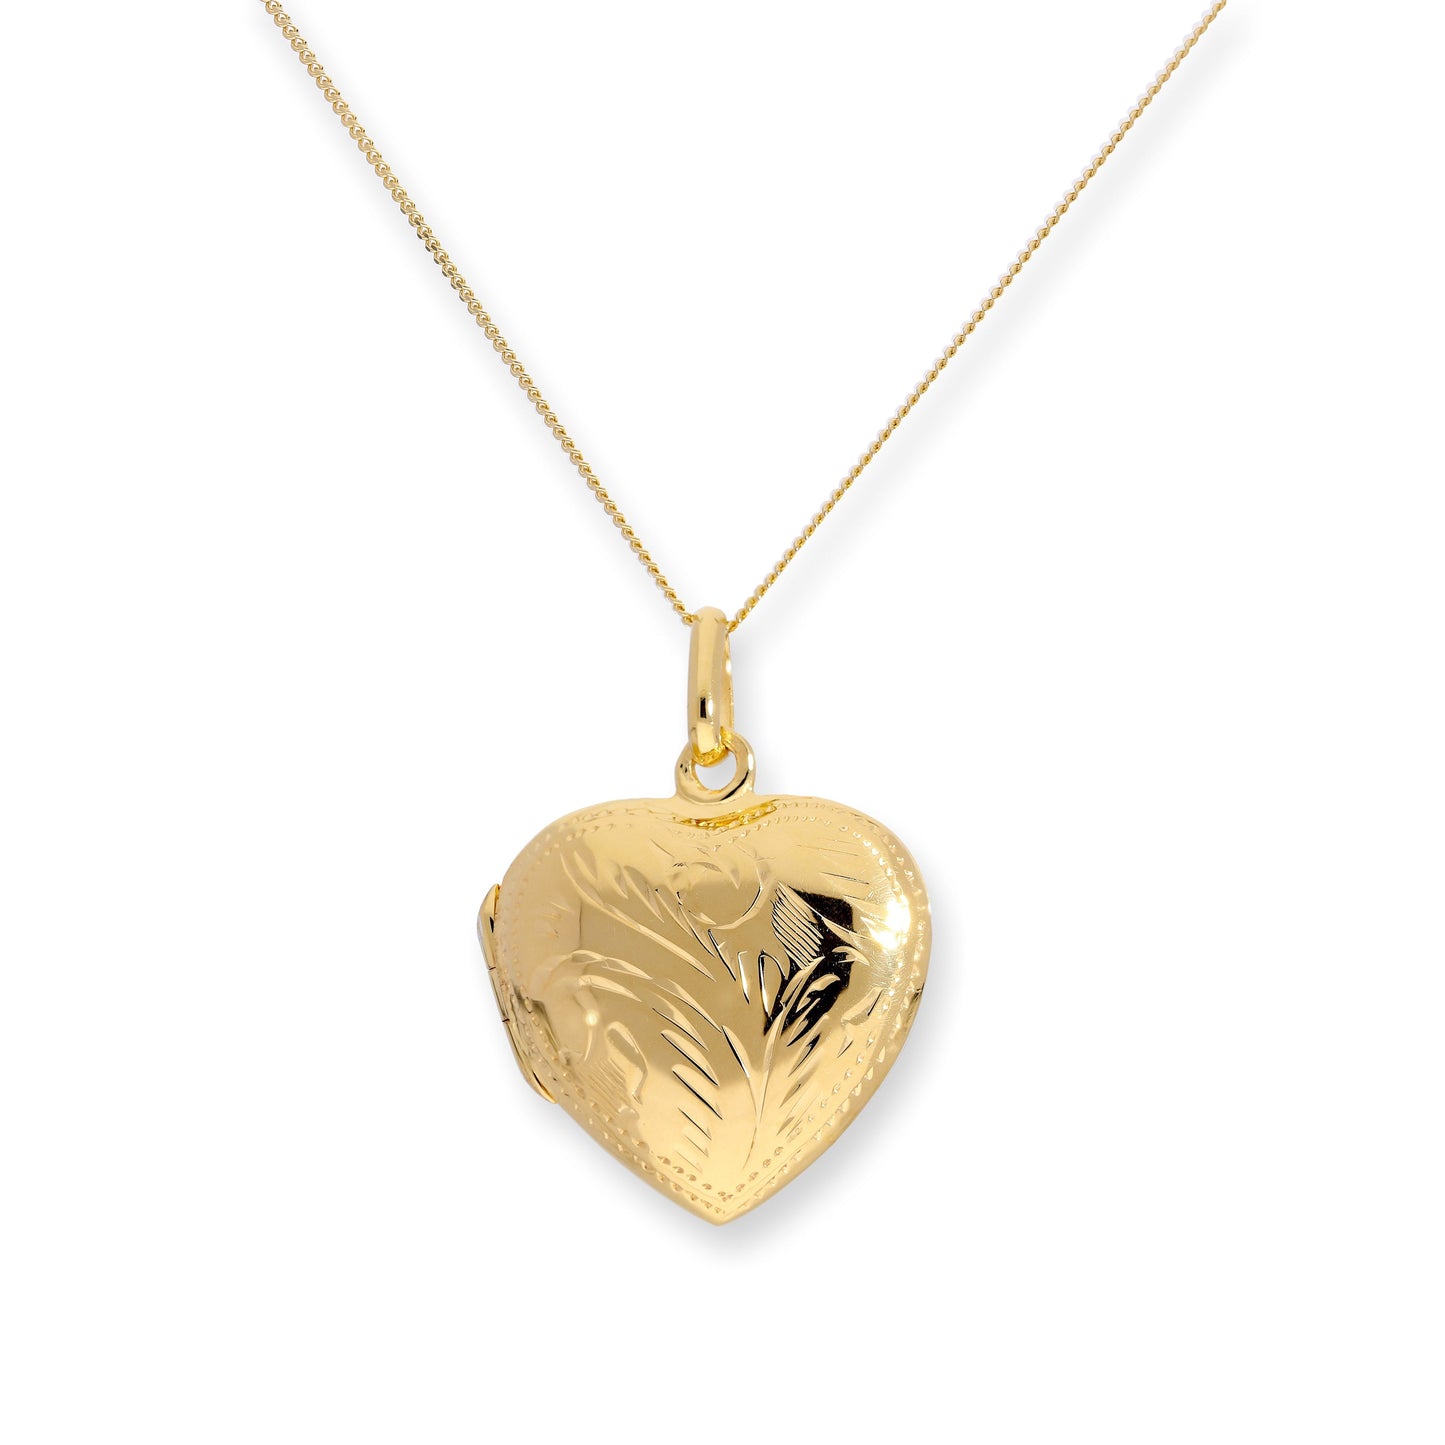 Gold Plated Sterling Silver Engraved Heart Locket on Chain 16 - 22 Inches